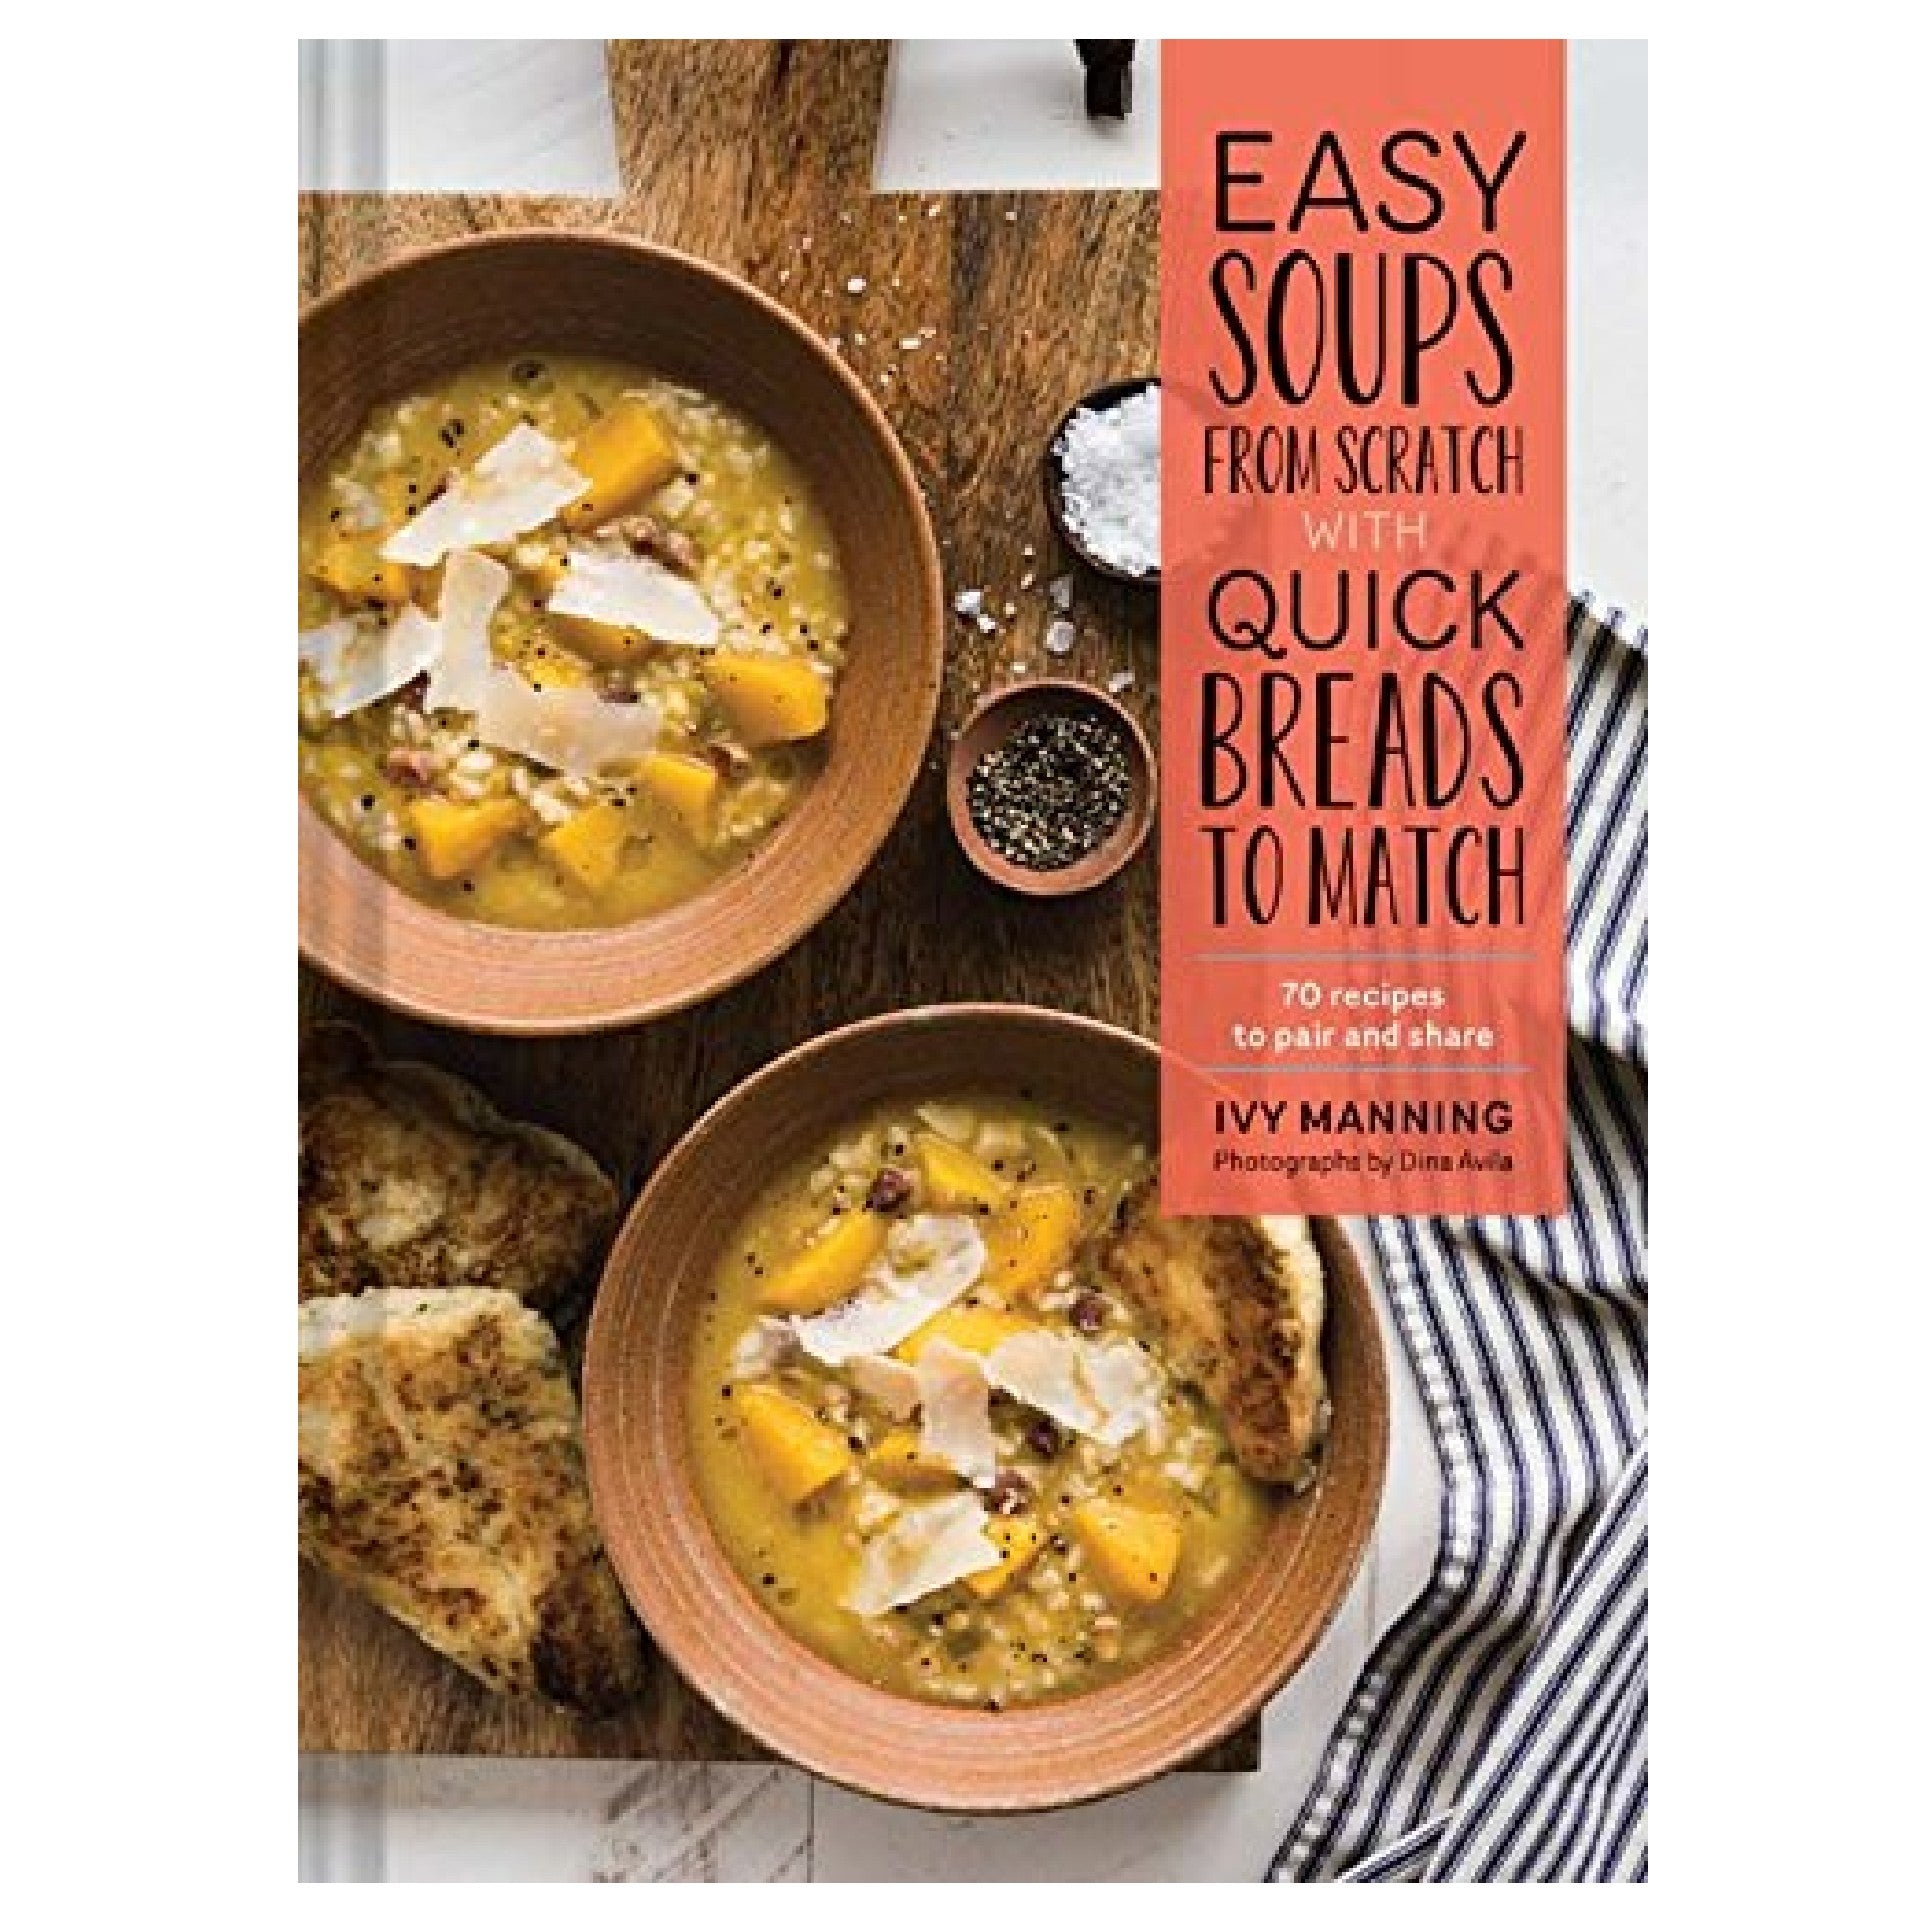 Easy Soups From Scratch & Quick Breads to Match